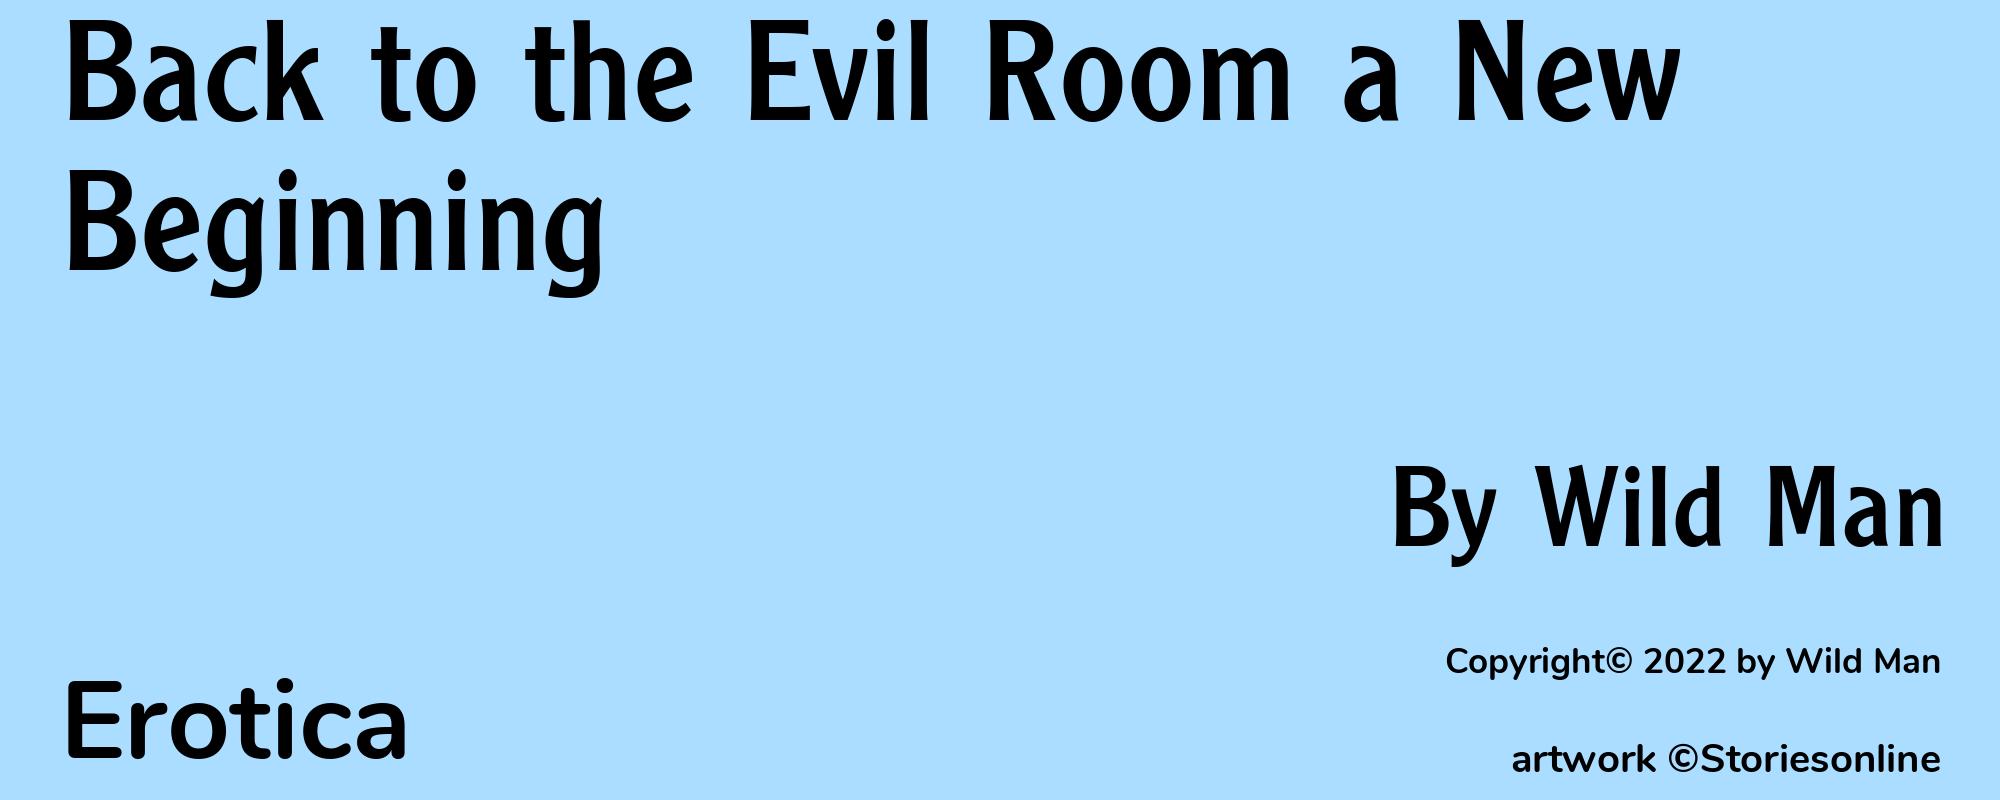 Back to the Evil Room a New Beginning - Cover